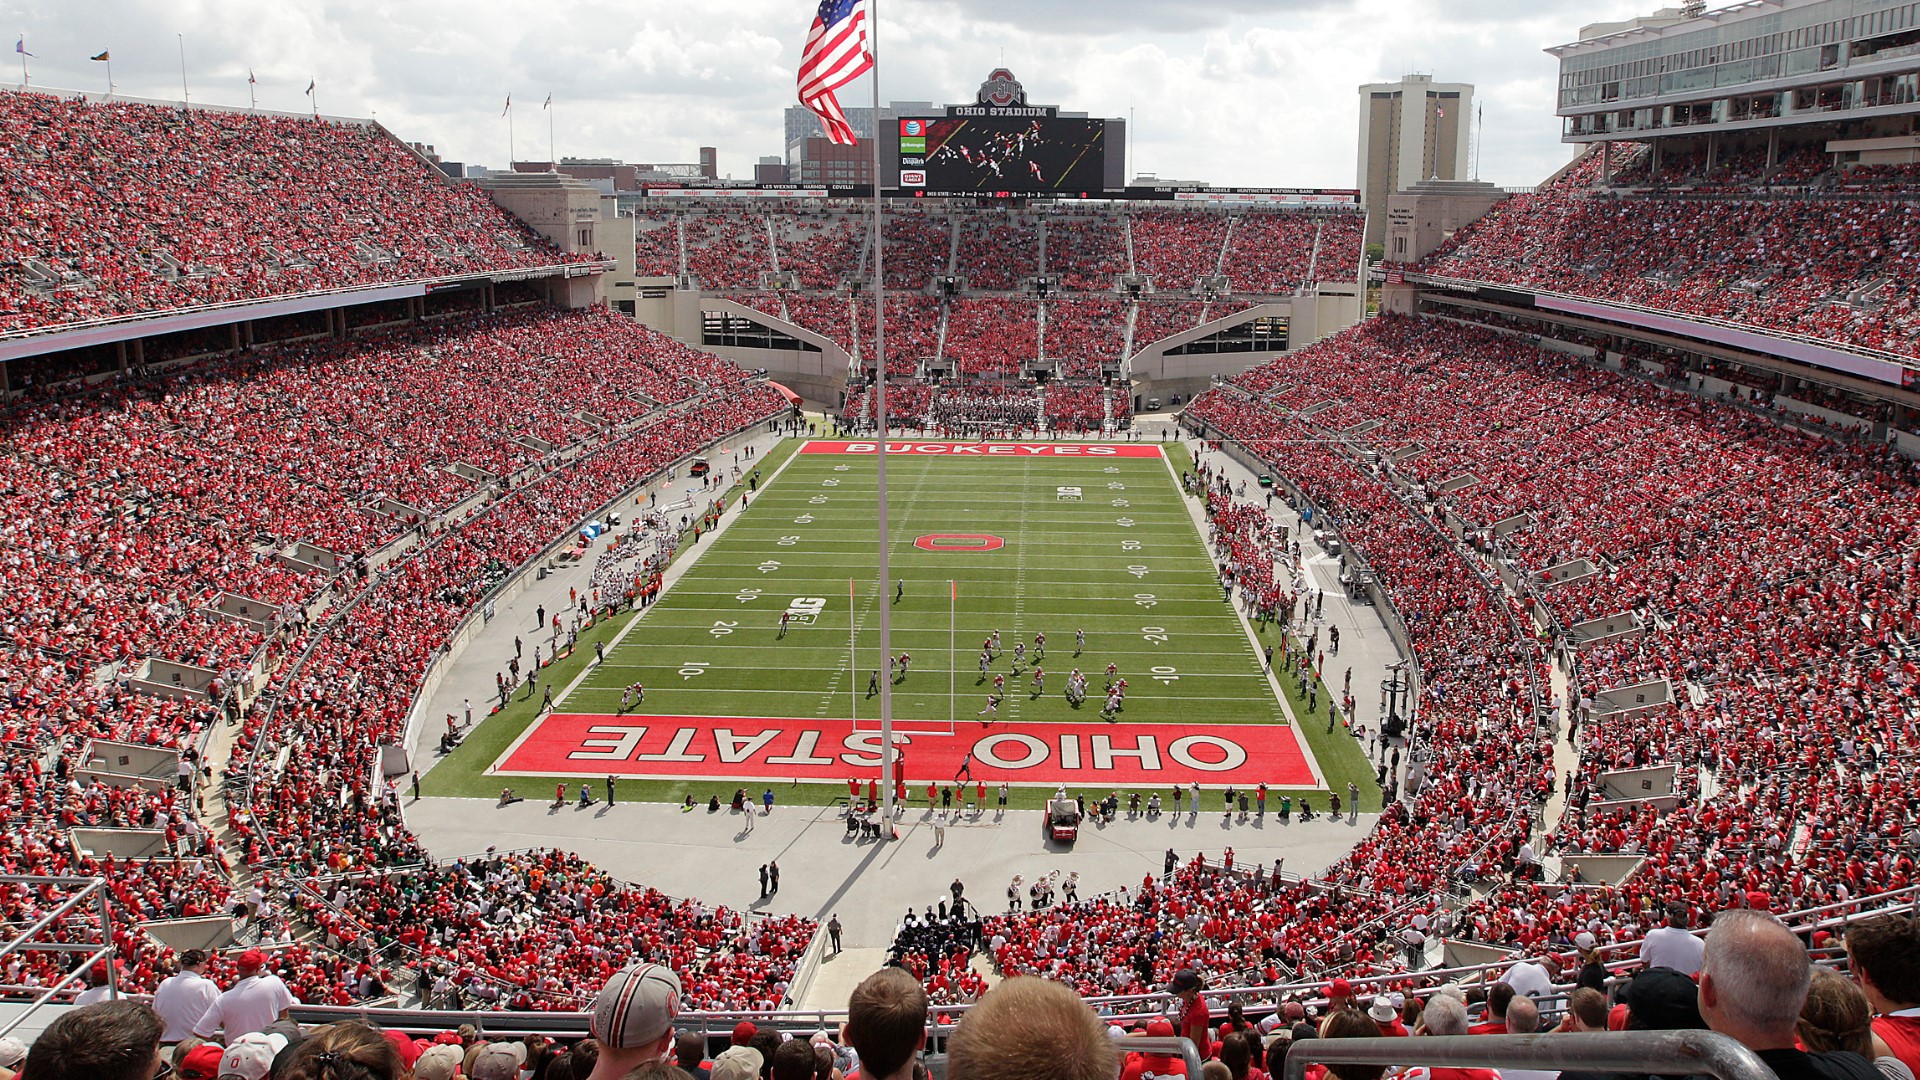 Ohio State athletic director Gene Smith said the university is planning to bring back fans for the 2021 season.